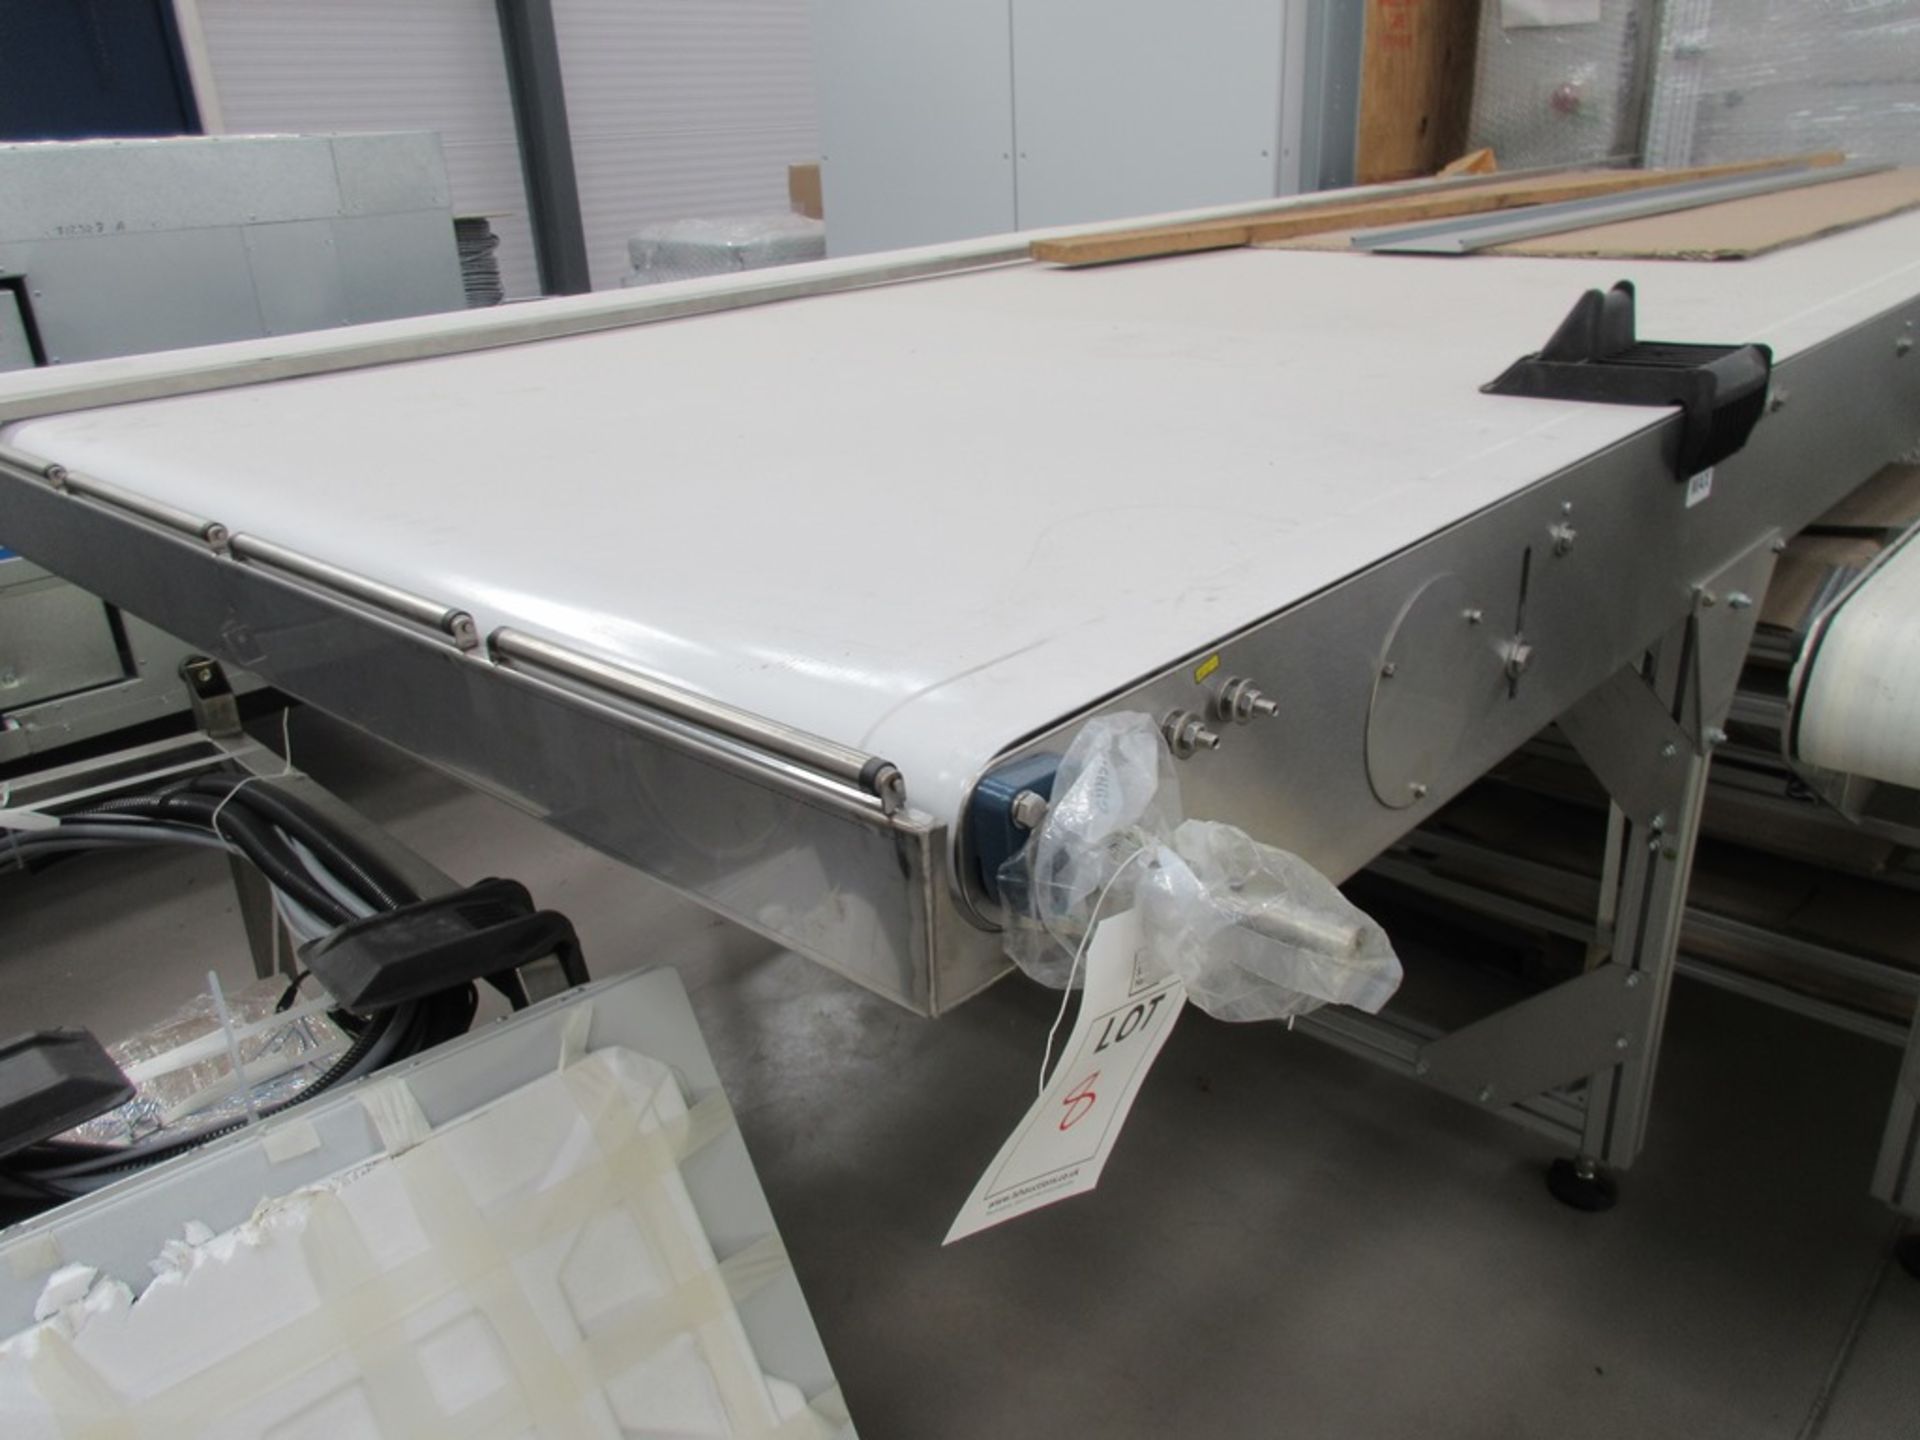 The Vac Company CNC HVV-1300-2000 vacuum insulated panel production machine, serial no. 090-0362- - Image 11 of 13